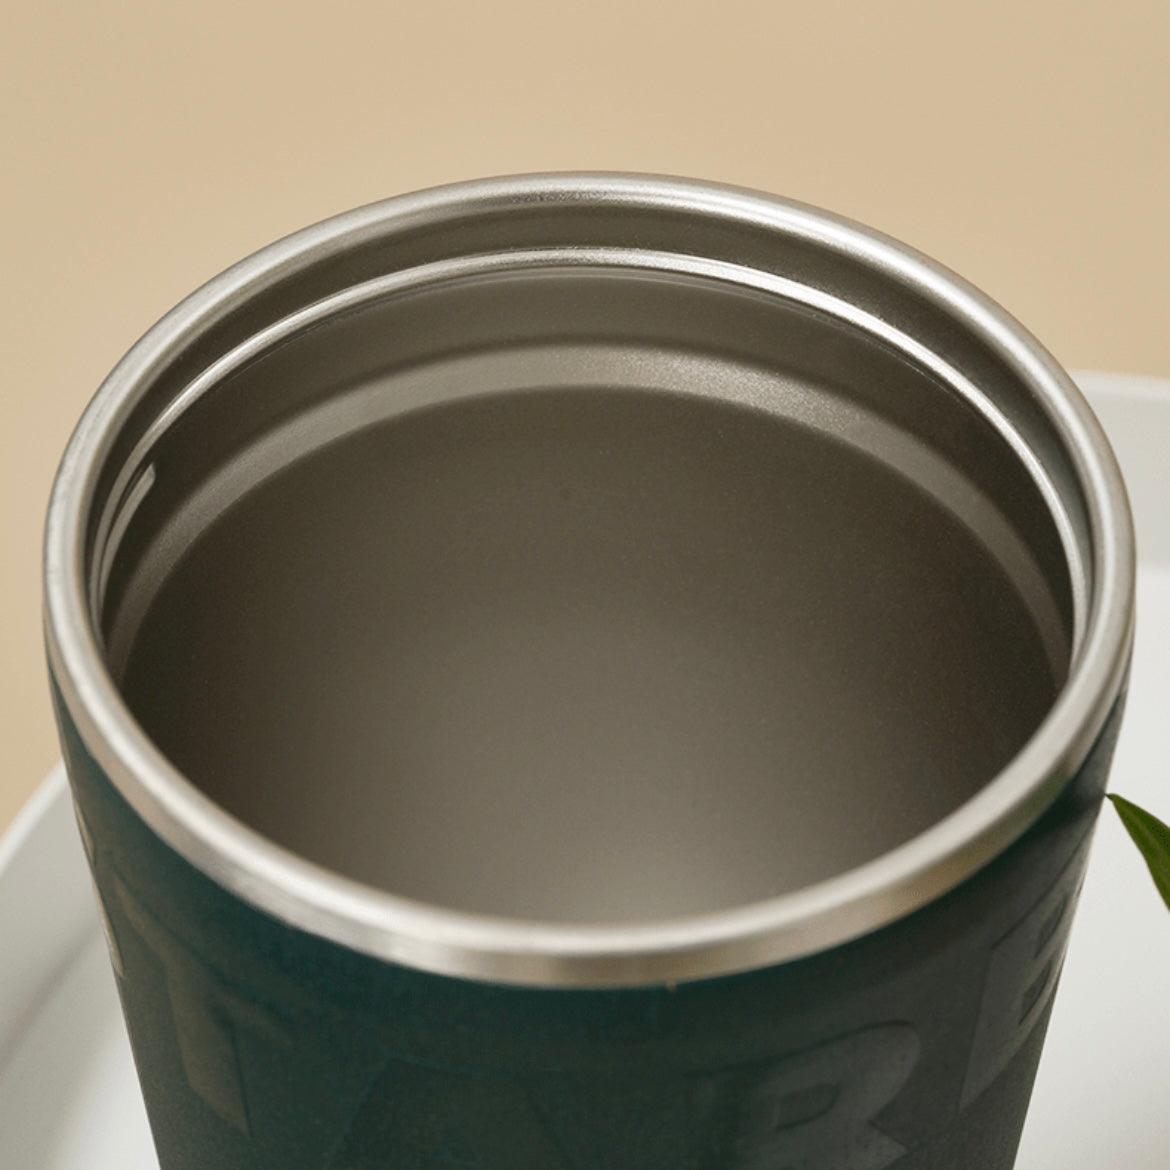 Starbucks 480ml/16oz Stainless Steel Cup with Sleeve